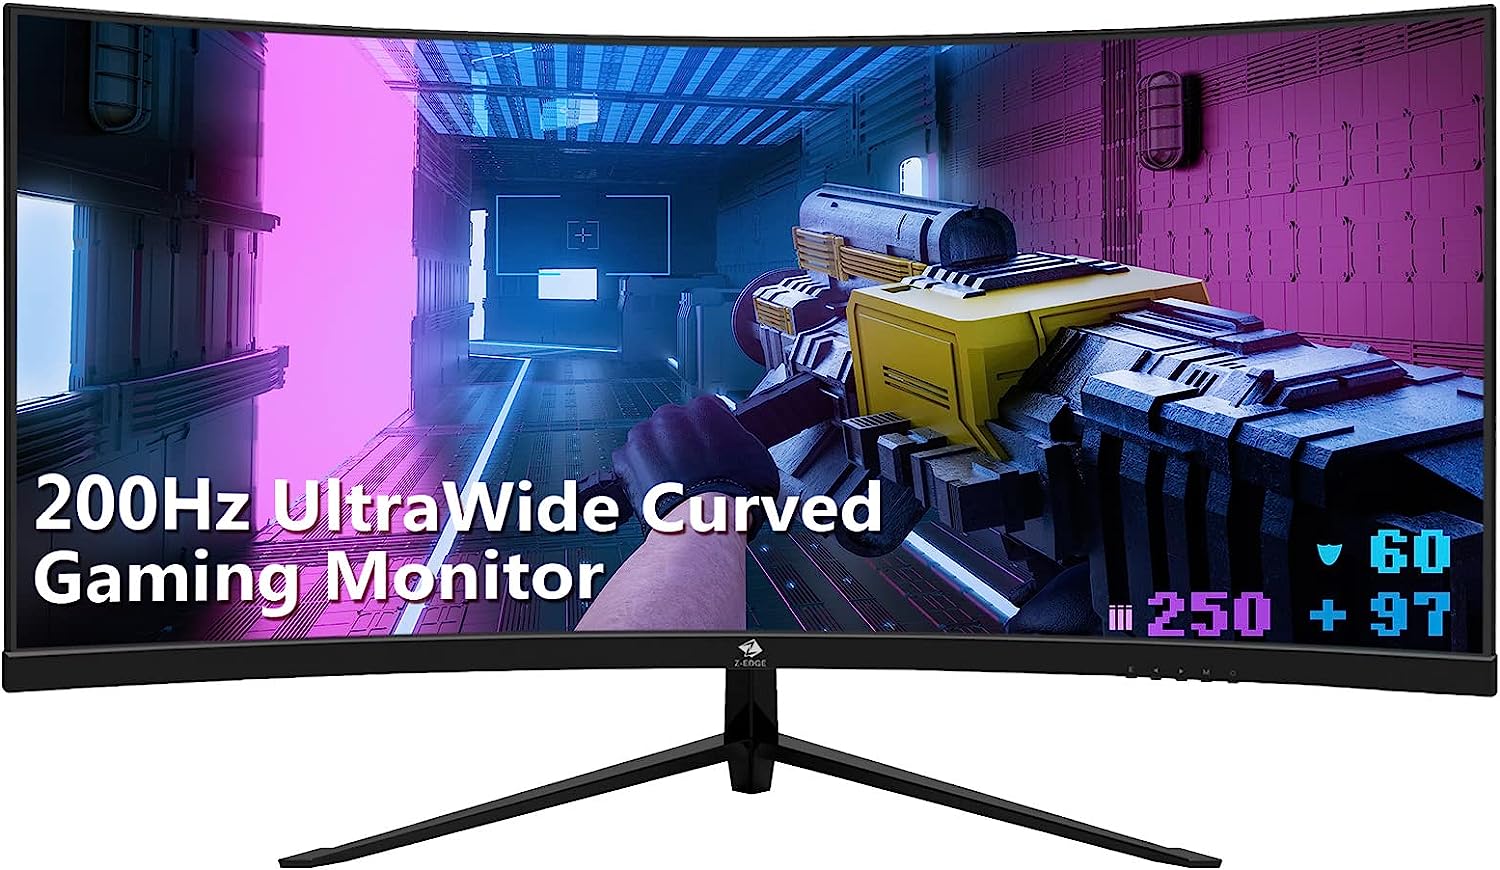 Z-Edge 30-inch Curved Gaming Monitor, 200Hz Refresh [...]